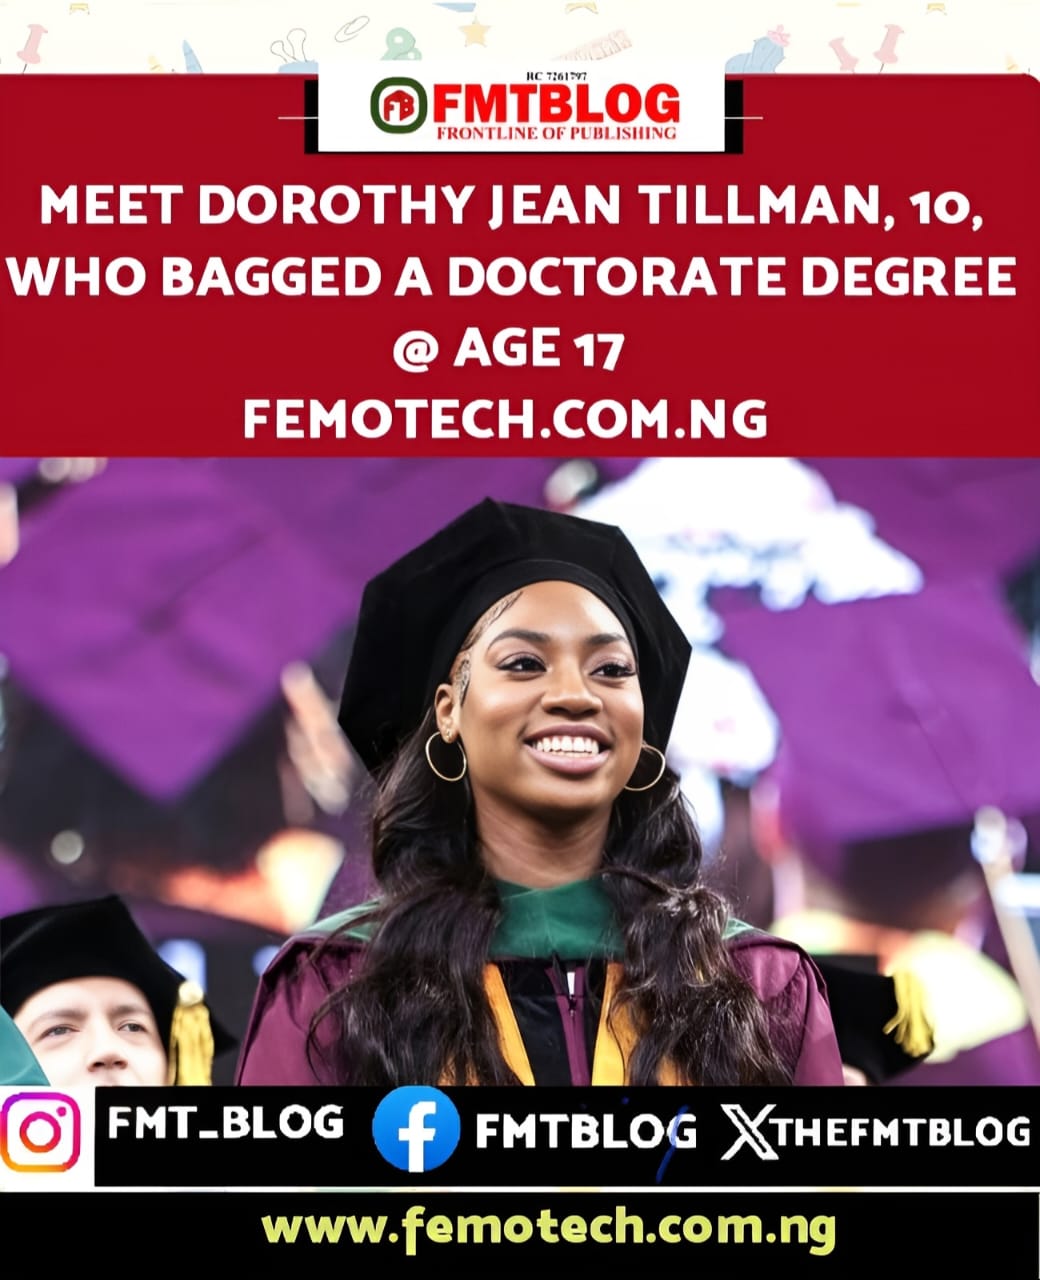 Meet Dorothy Jean Tillman, 10, Who Bagged a Doctorate Degree @ Age 17